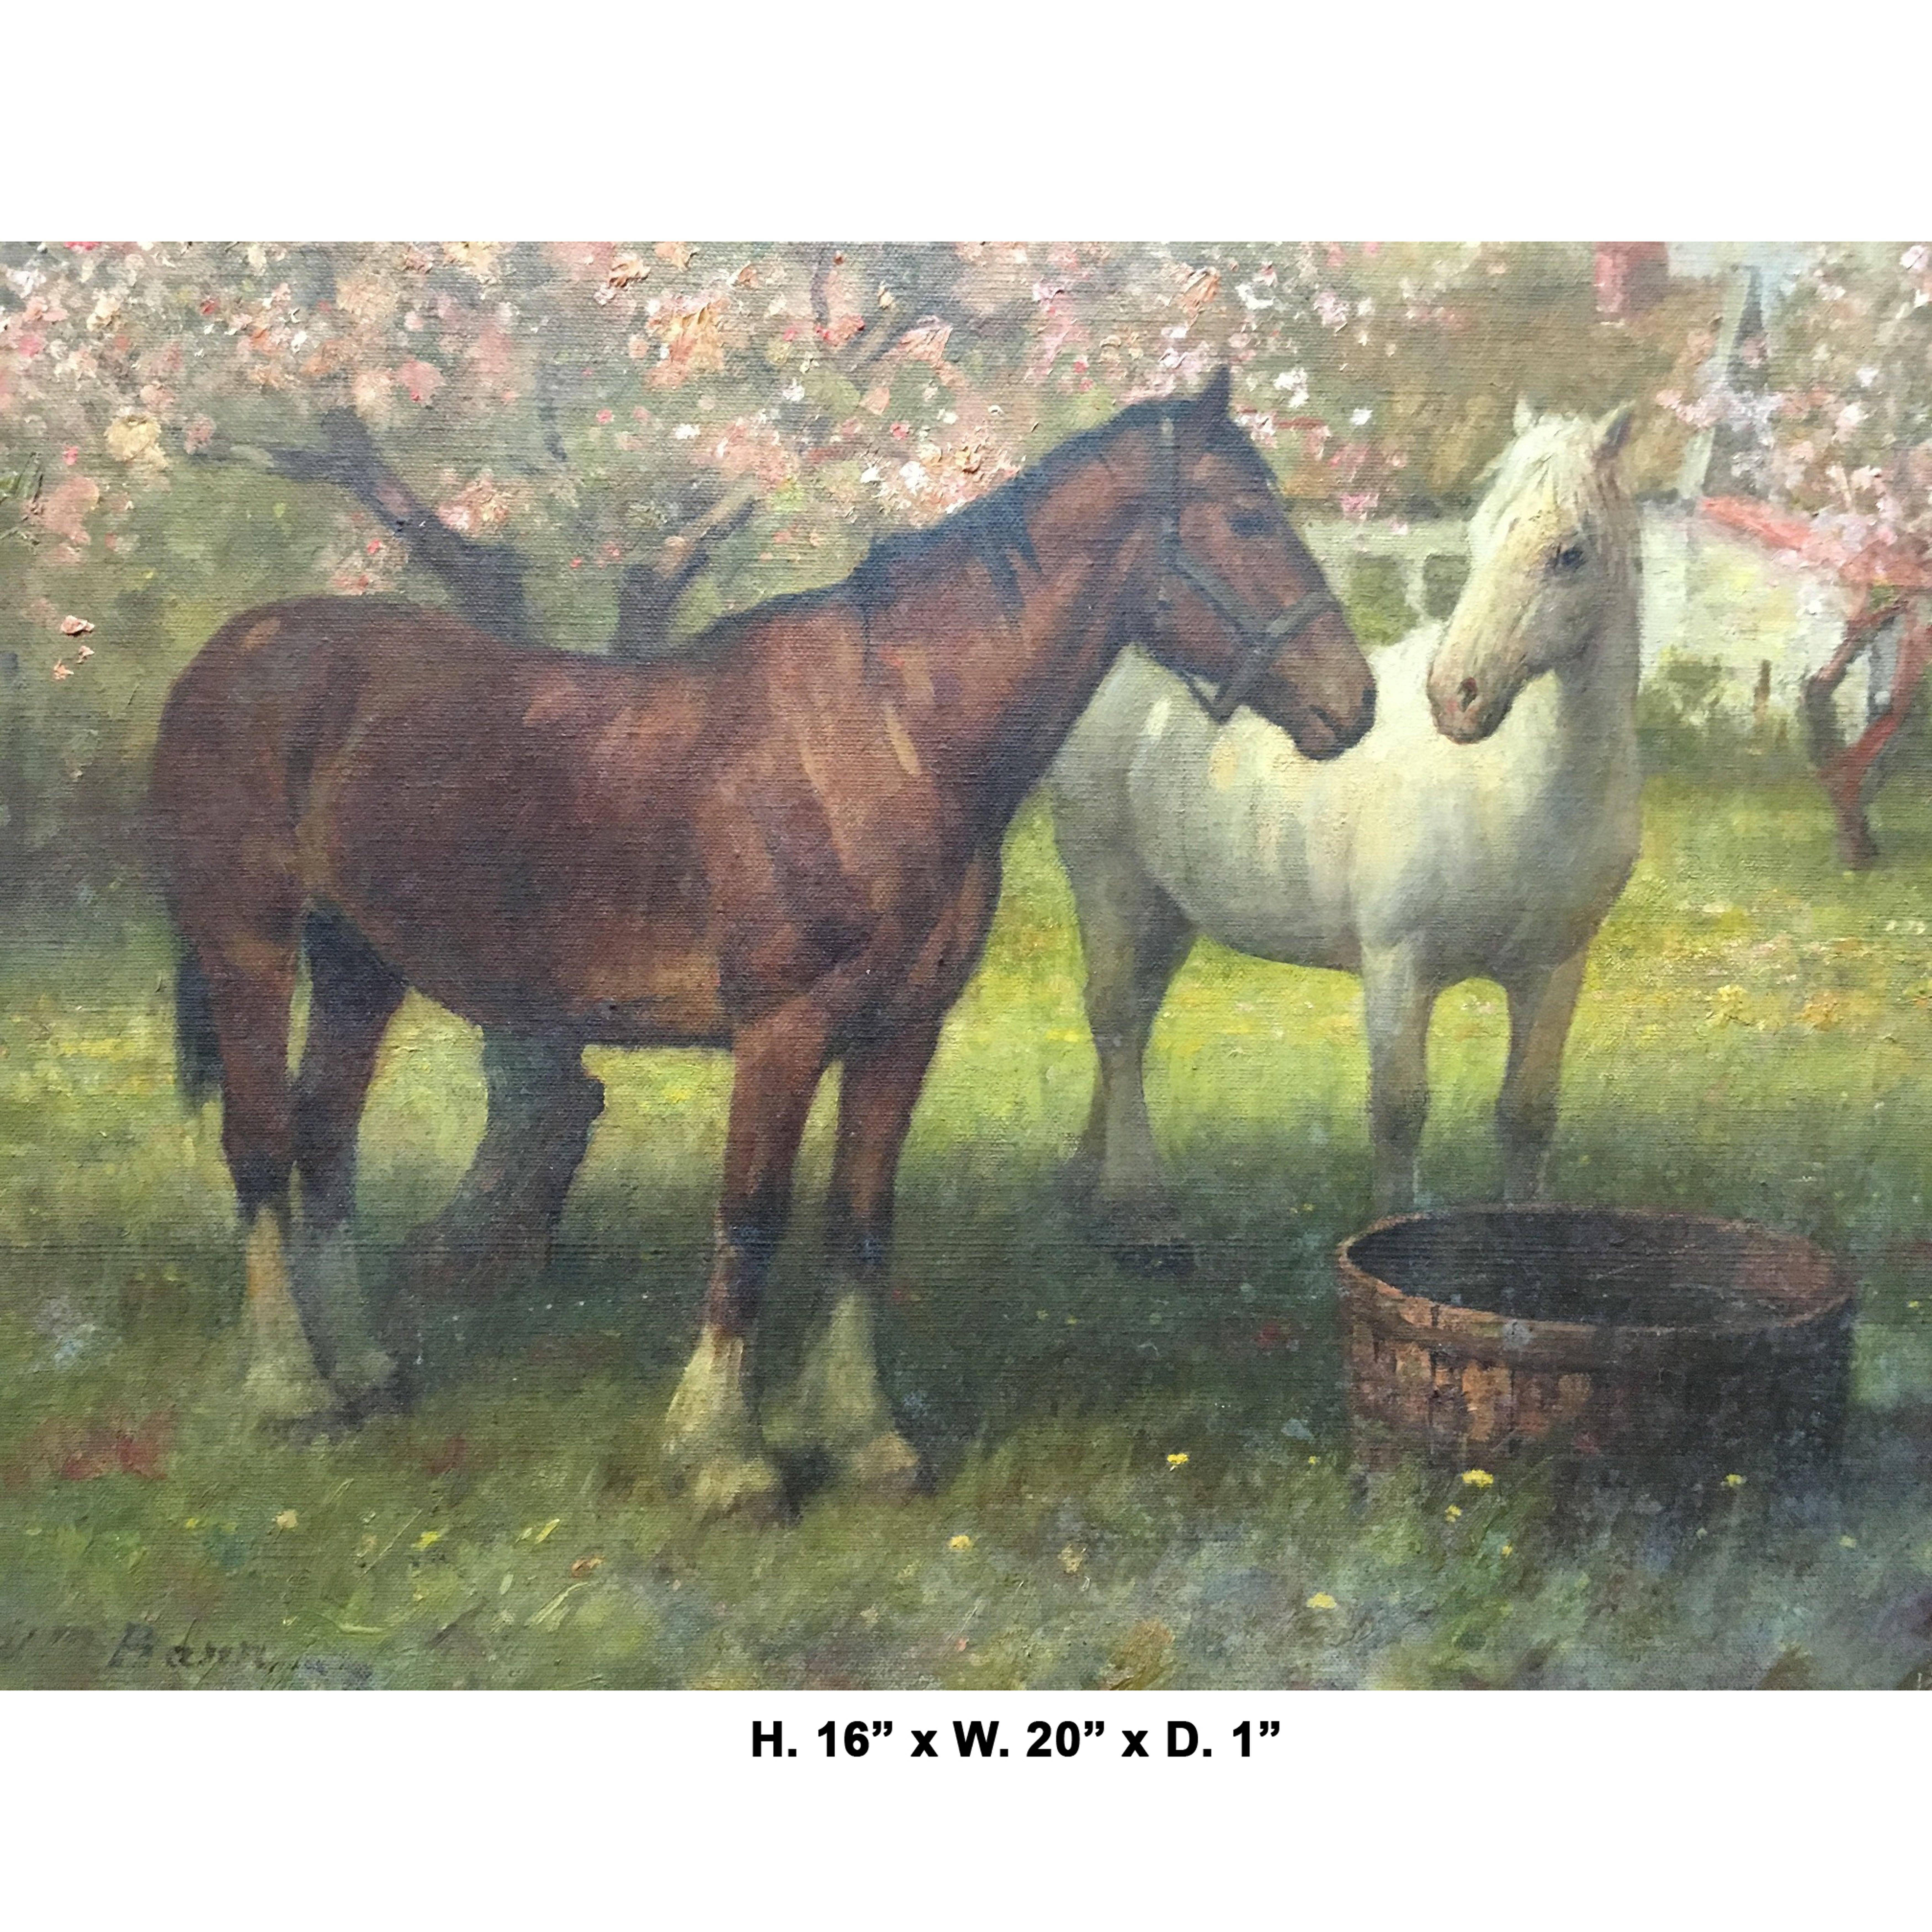 Beautiful oil on canvas painting of two horses in a field in front of a water basin.
Signed W. Barr possibly is William Barr (1867-1933, Scotland).
Late 19th-early 20th century
Overall dimensions: H. 16